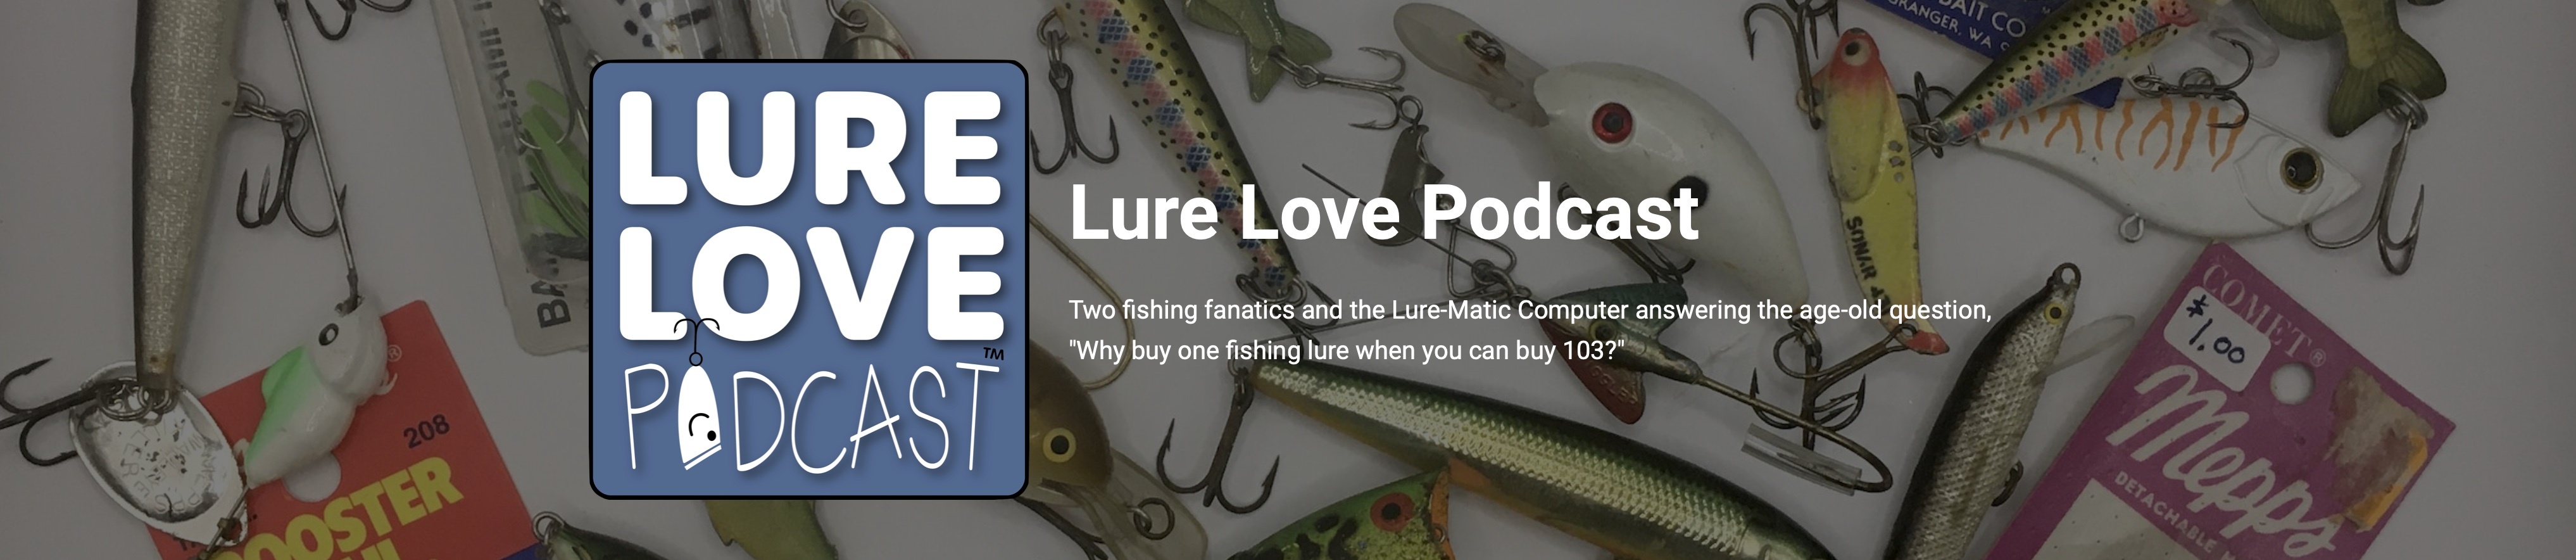 What is the World's largest collection of fishing lures?